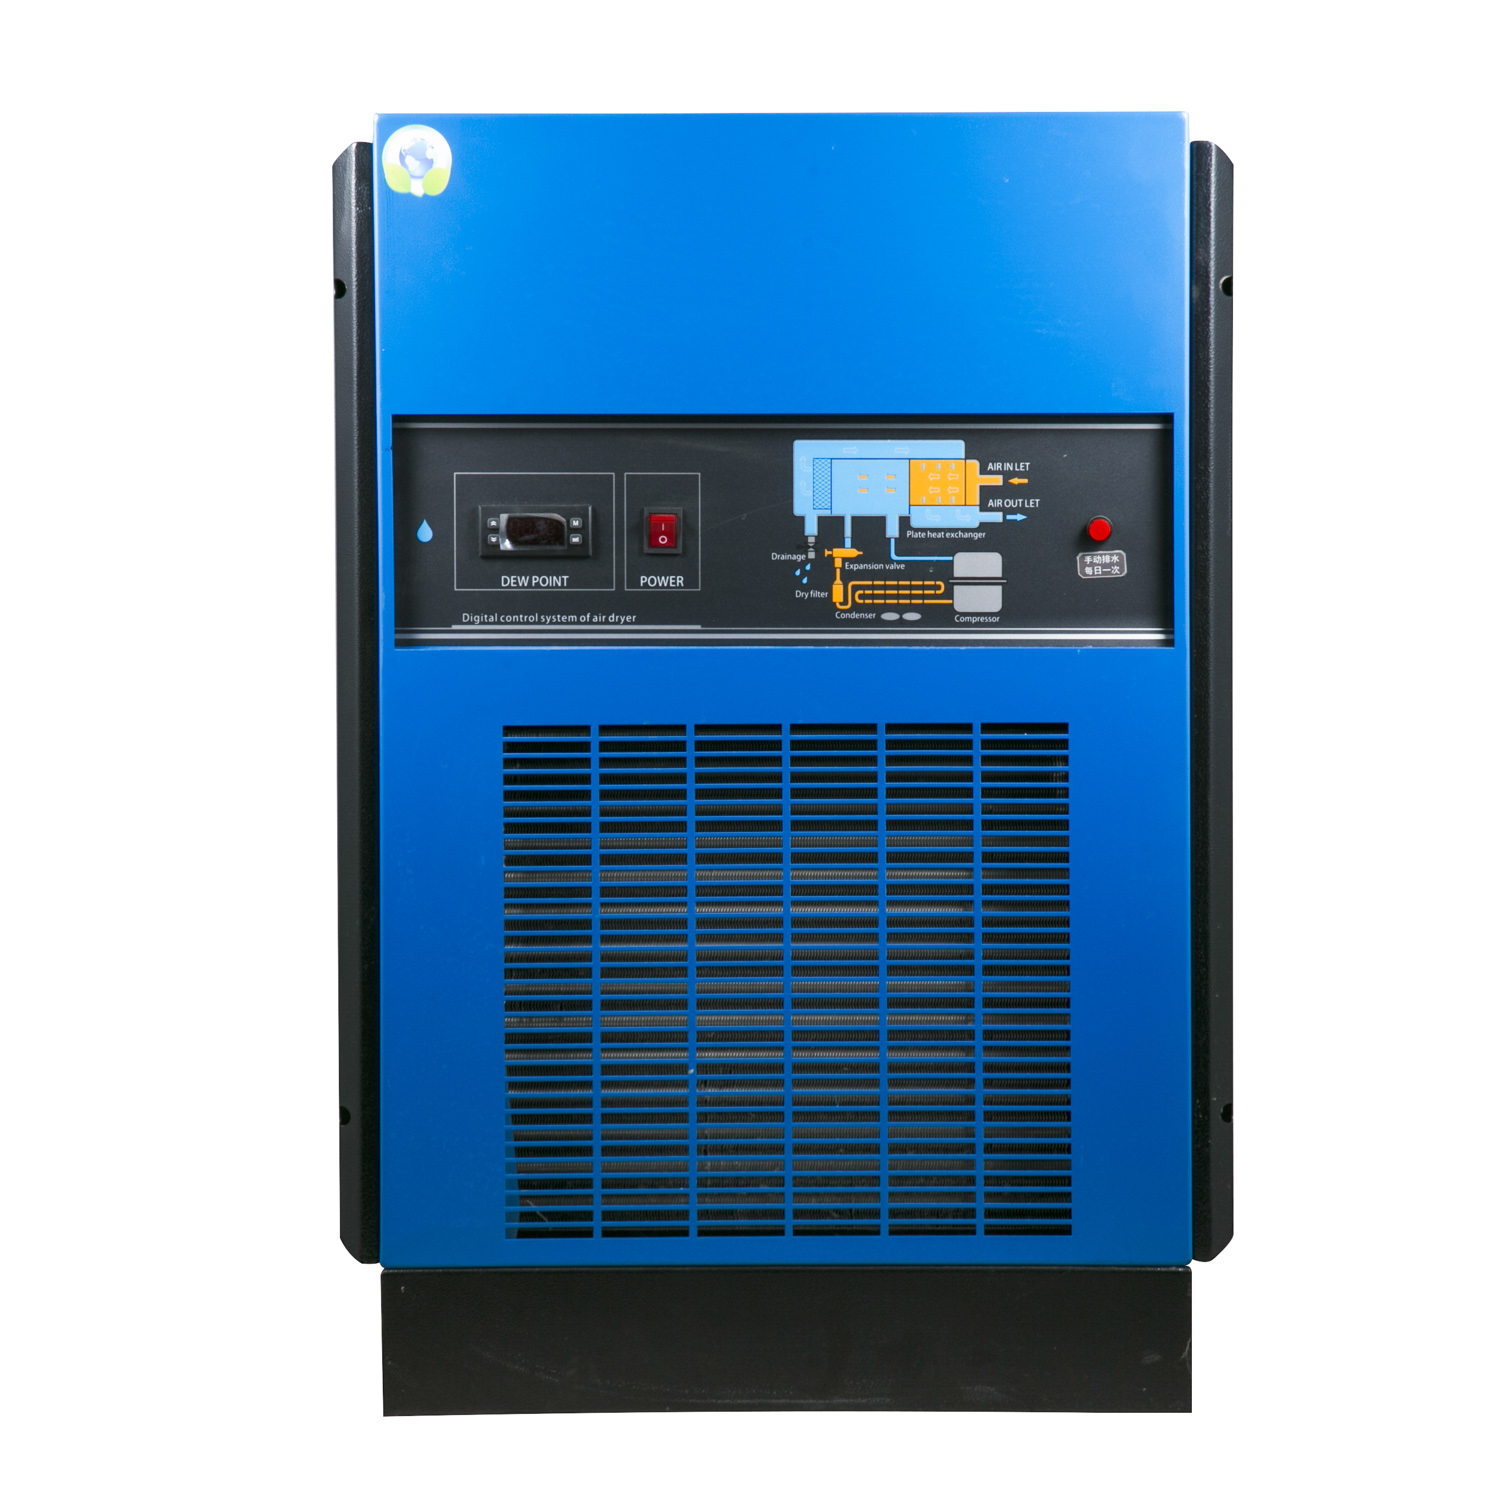 What are the characteristics of the low-pressure refrigerated air dryer of the refrigerated air dryer manufacturer?